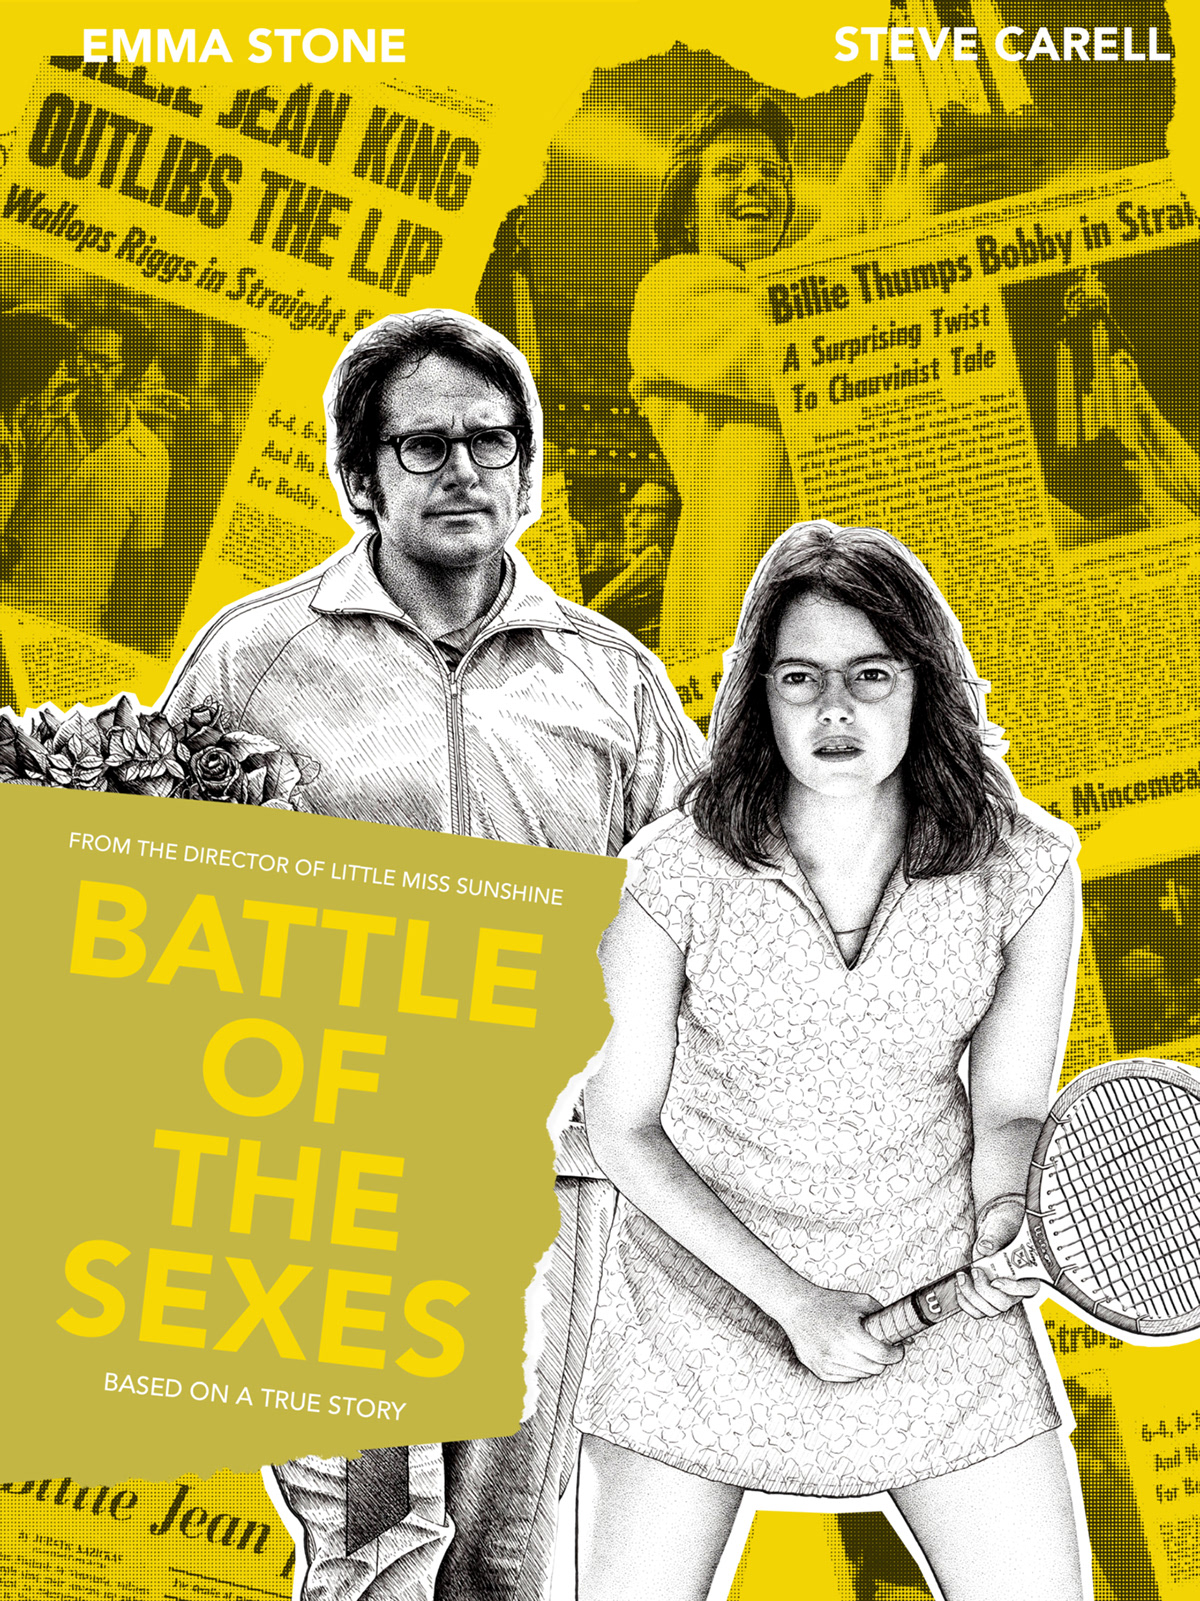 Battle Of The Sexes - Original Movie Poster